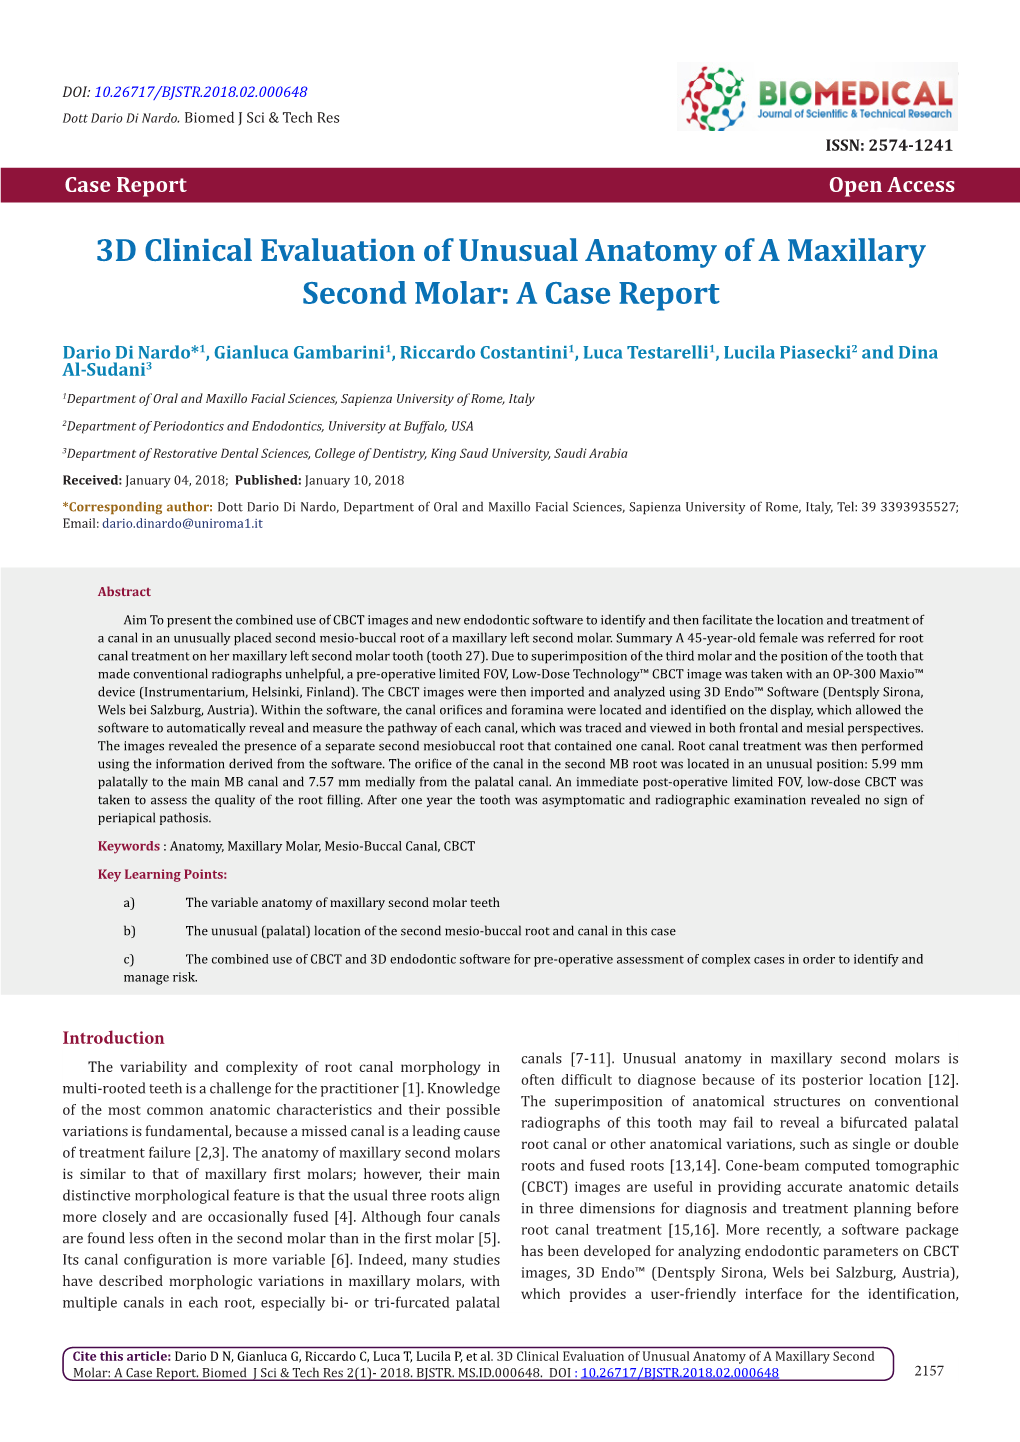 3D Clinical Evaluation of Unusual Anatomy of a Maxillary Second Molar: a Case Report